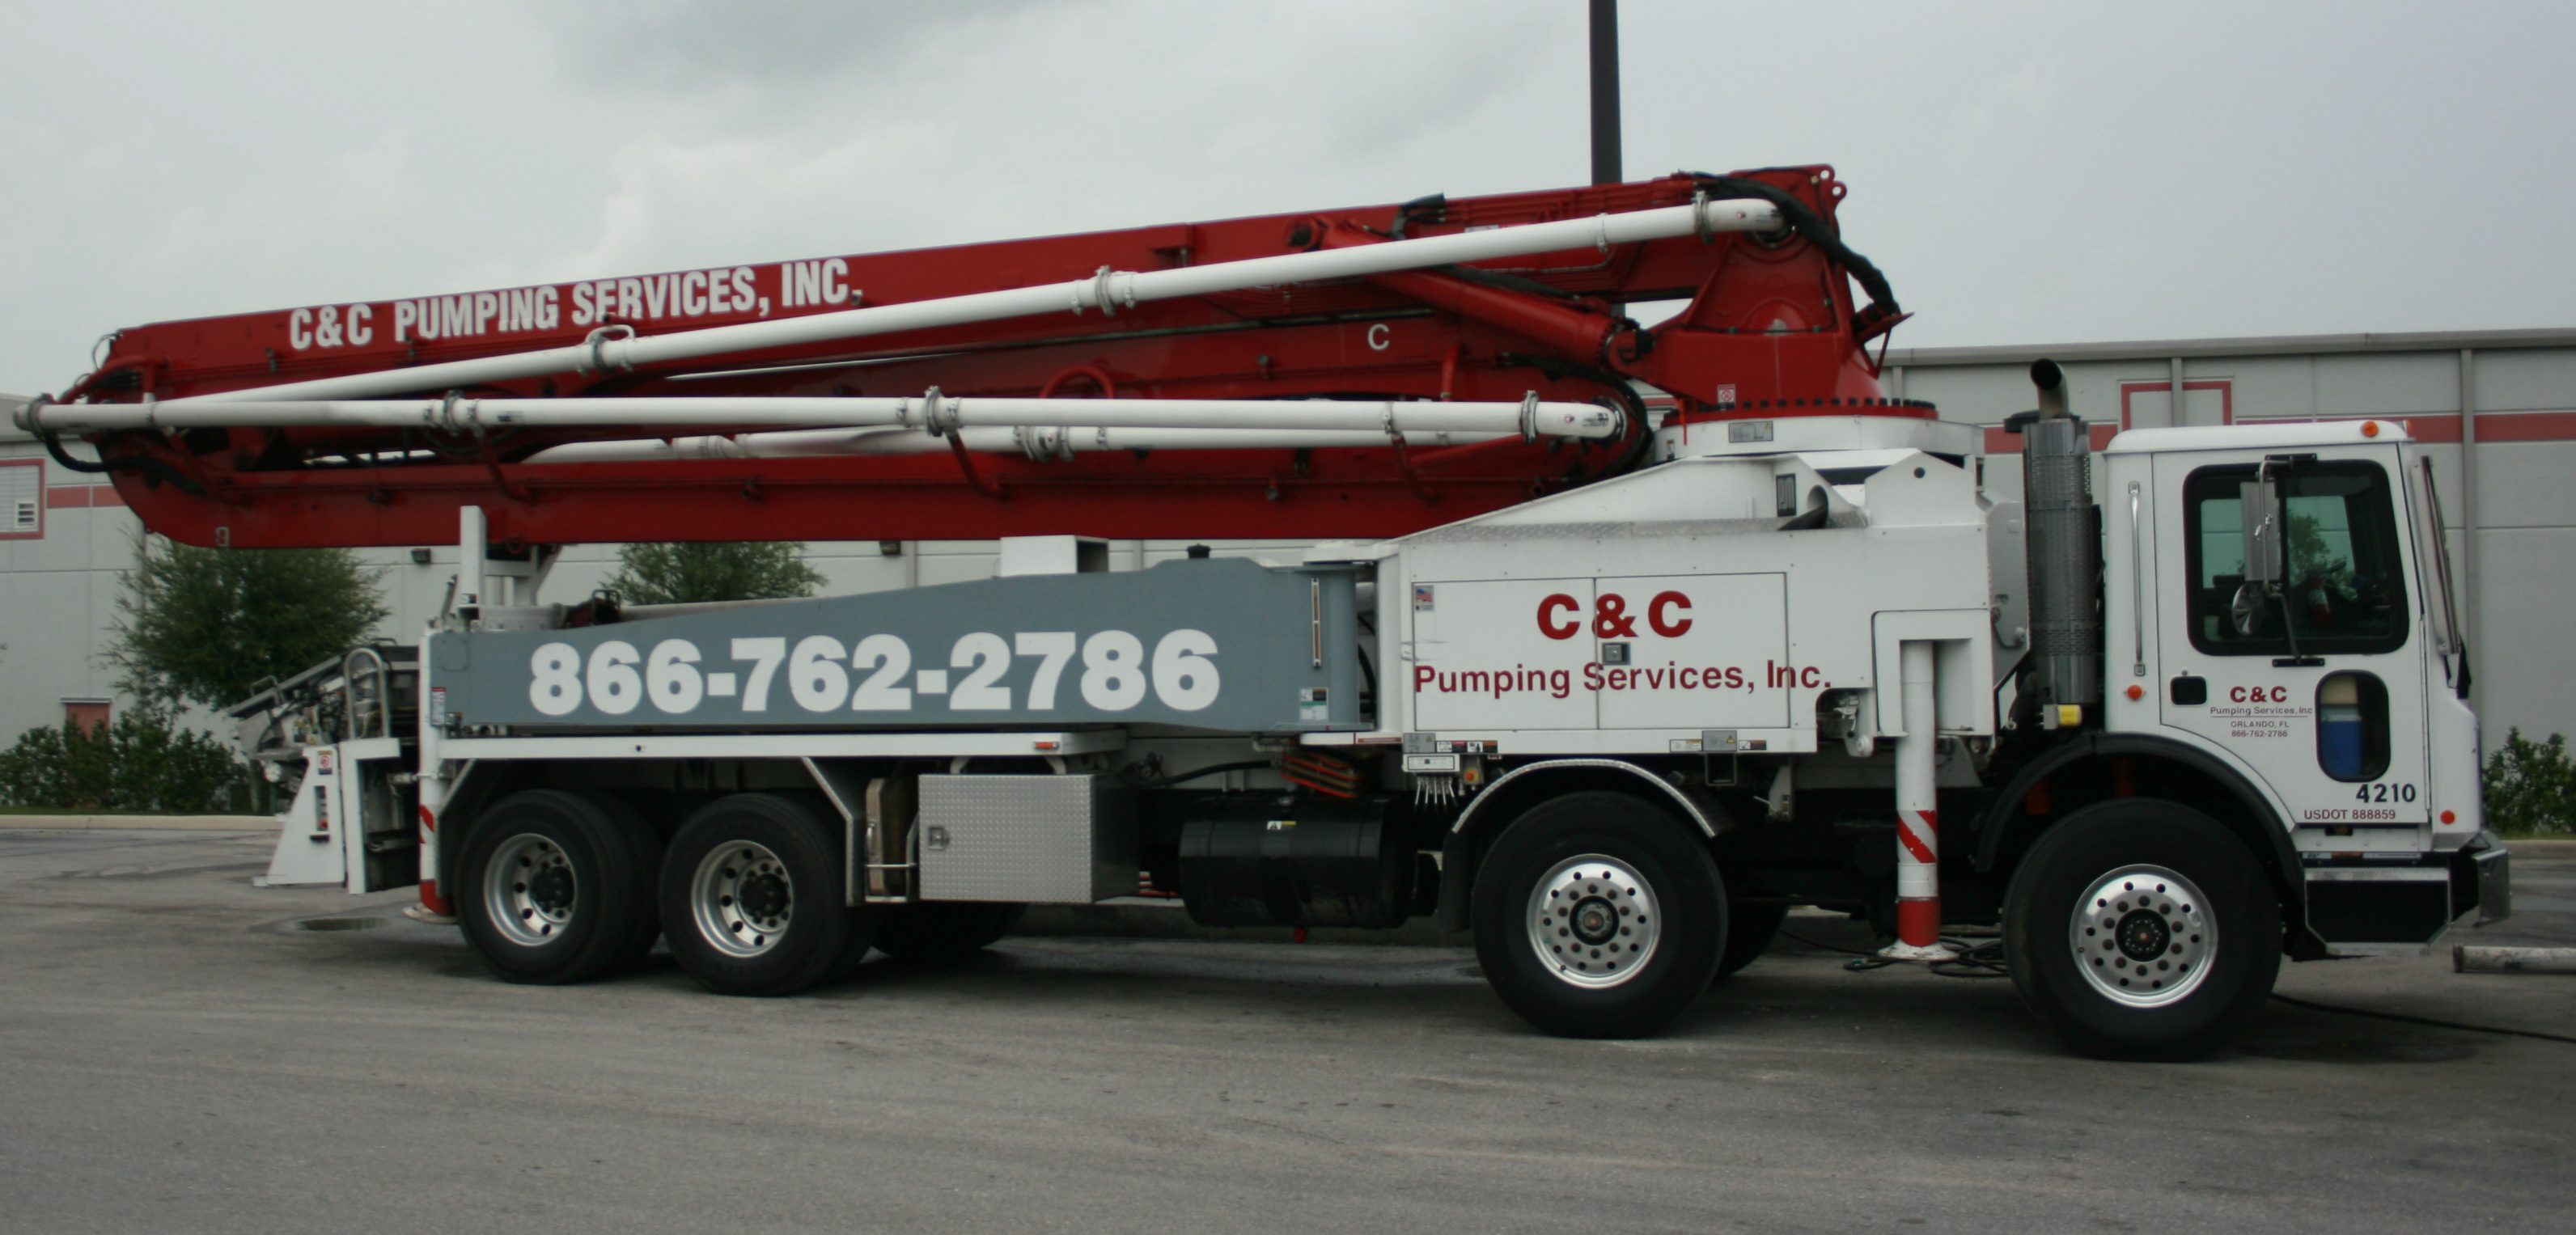 42 Meter concrete boom pump, provided by C&C Pumping Services Inc. 